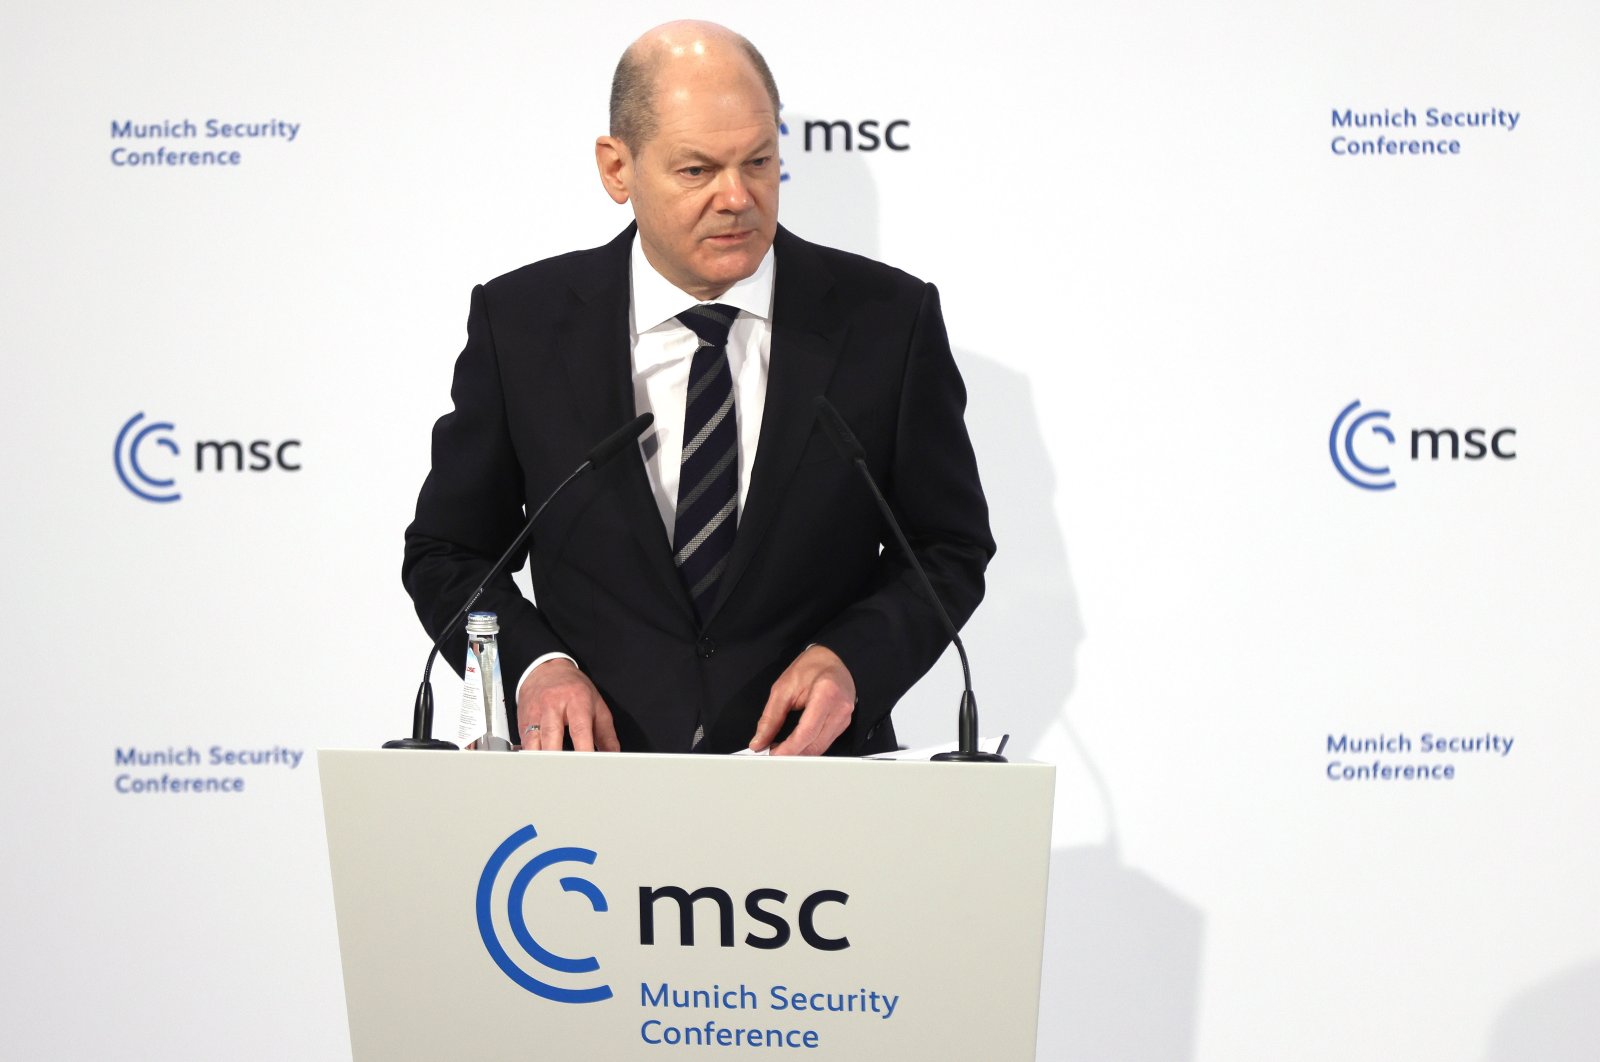 German Chancellor Olaf Scholz delivers a statement during the 58th Munich Security Conference (MSC) in Munich, Germany, Feb. 19, 2022. (EPA Photo)